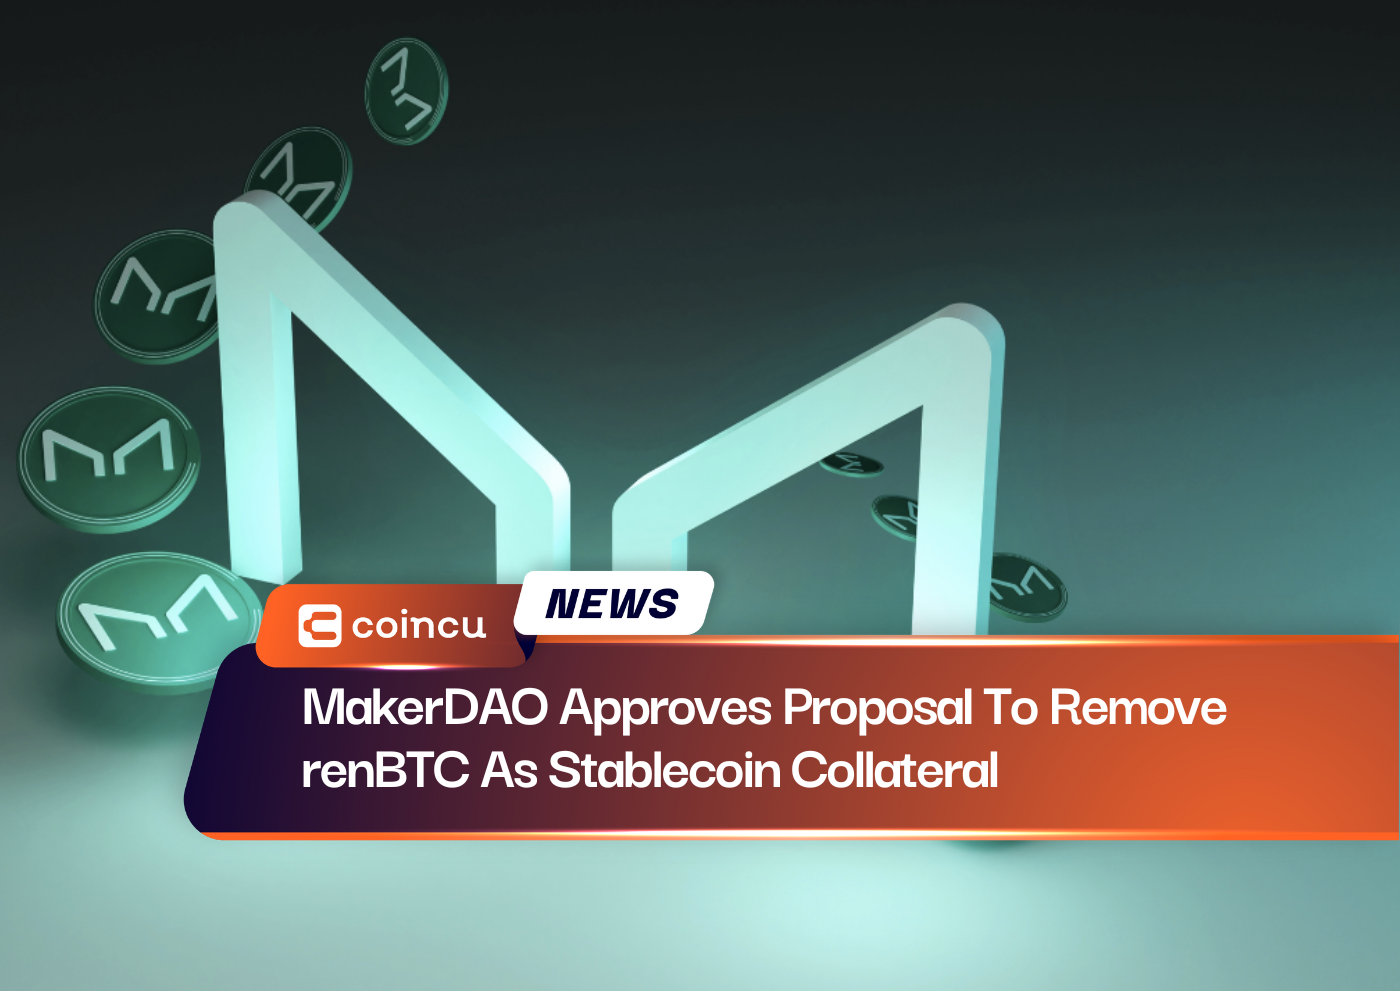 MakerDAO Approves Proposal To Remove renBTC As Stablecoin Collateral